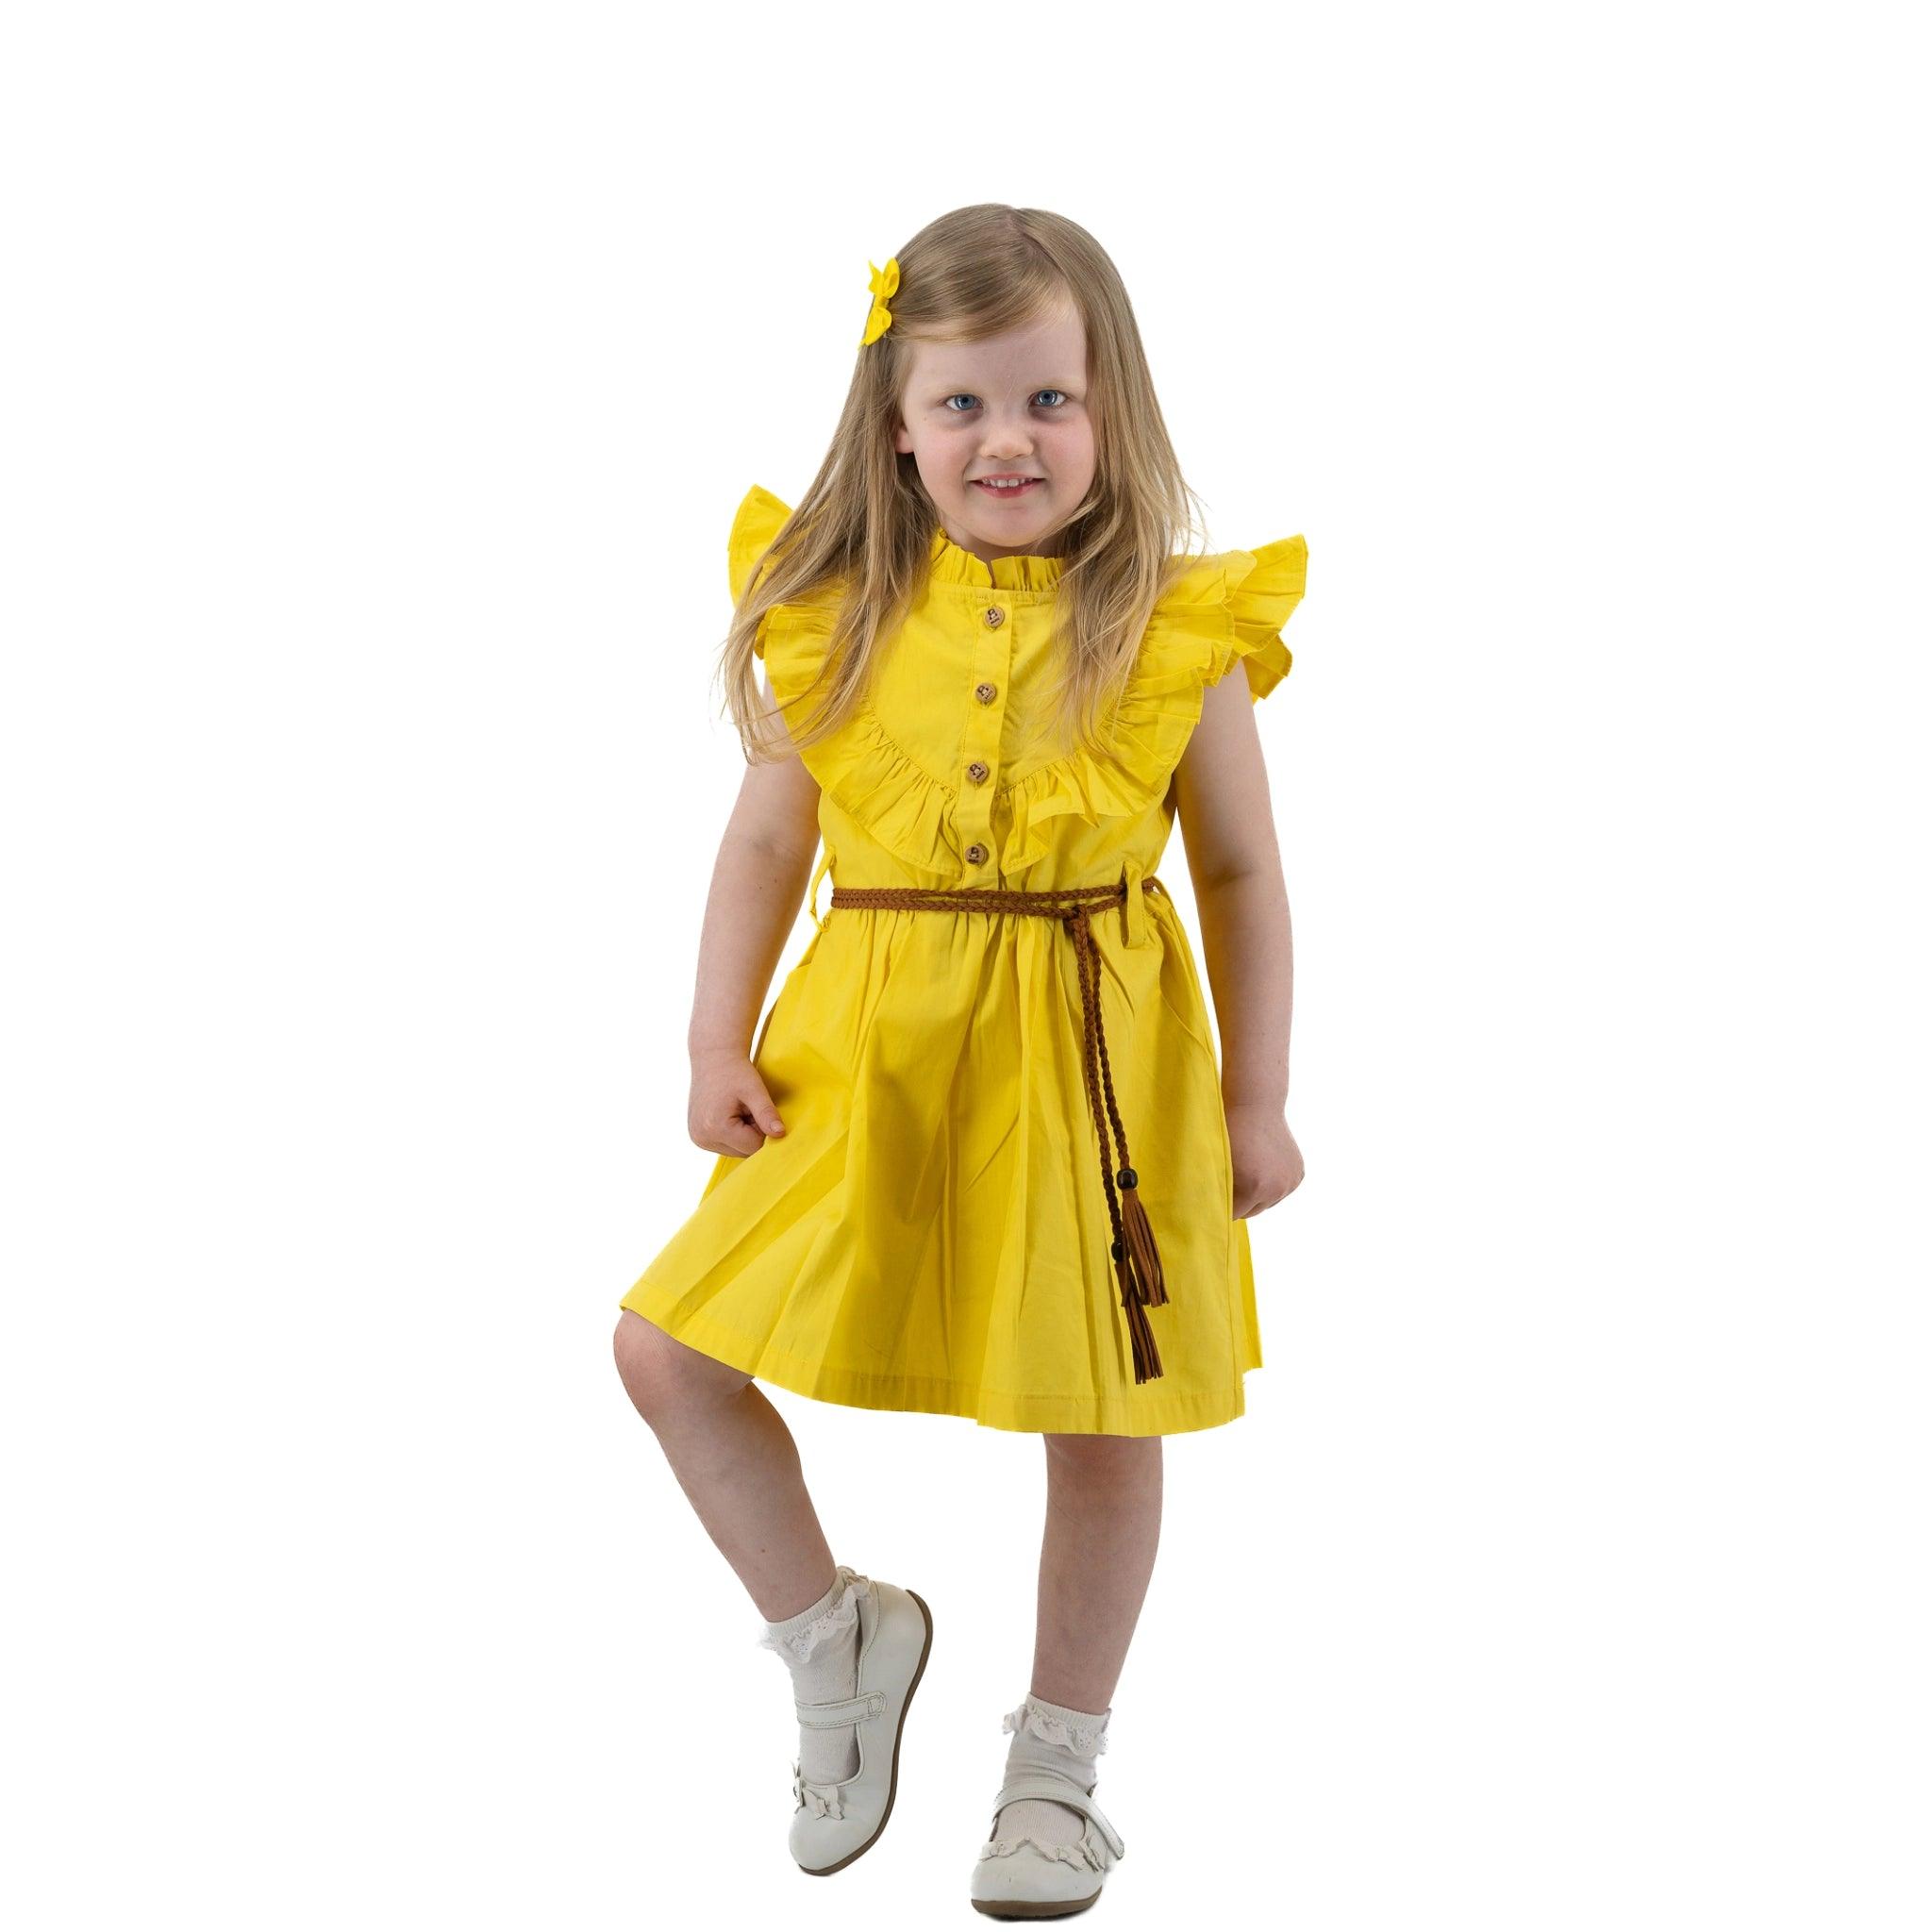 Young girl in a Karee Yellow Butterfly Sleeve Cotton Dress For Girls smiling and posing against a white background.